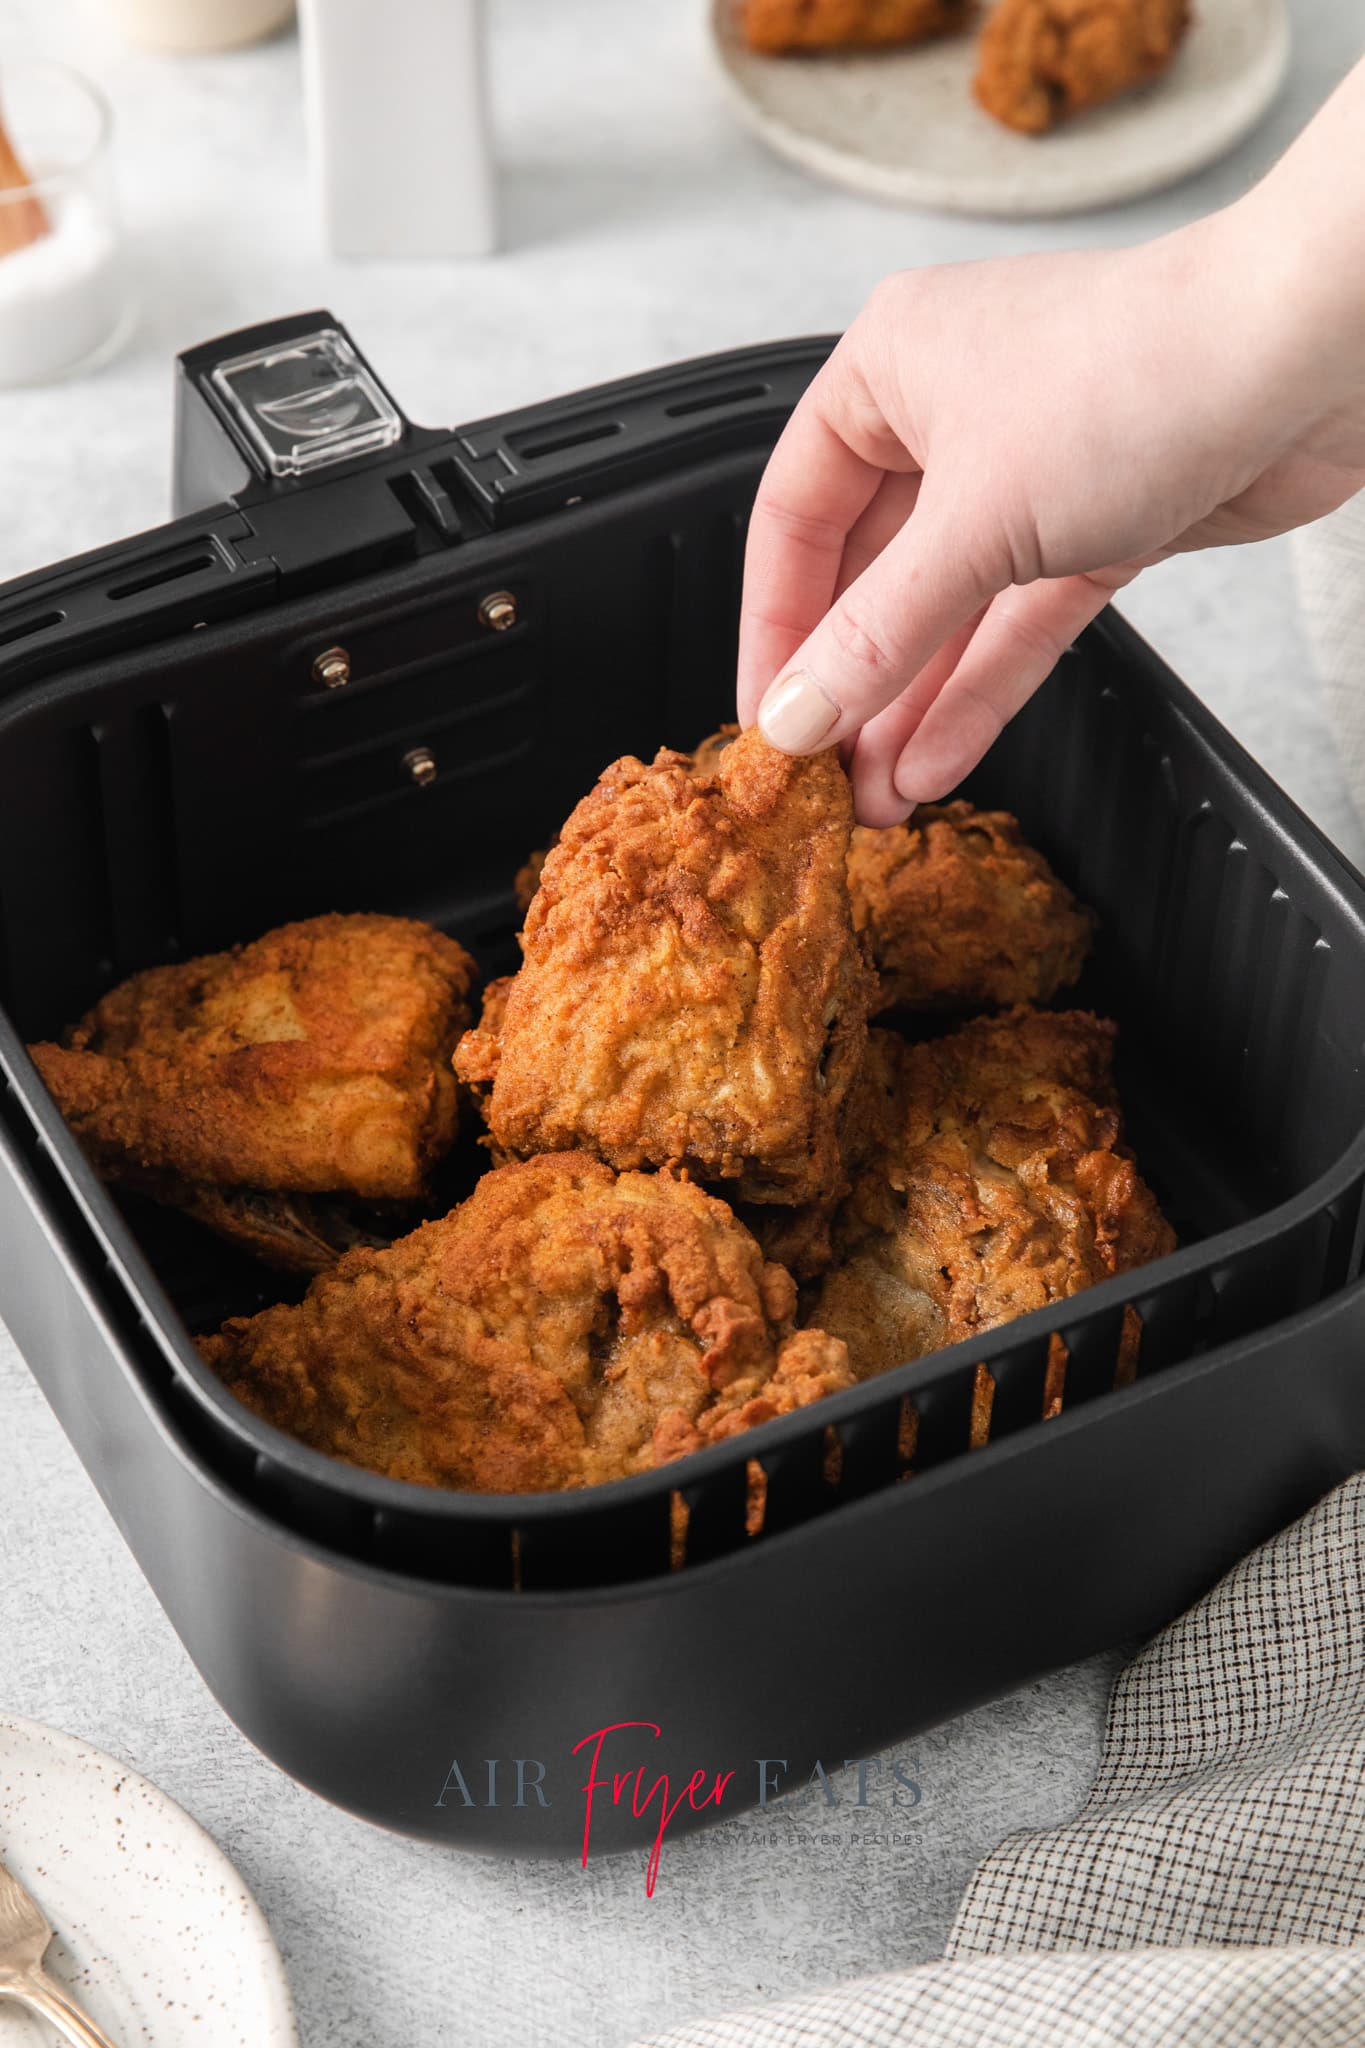 a hand picking up reheated fried chicken from the air fryer.